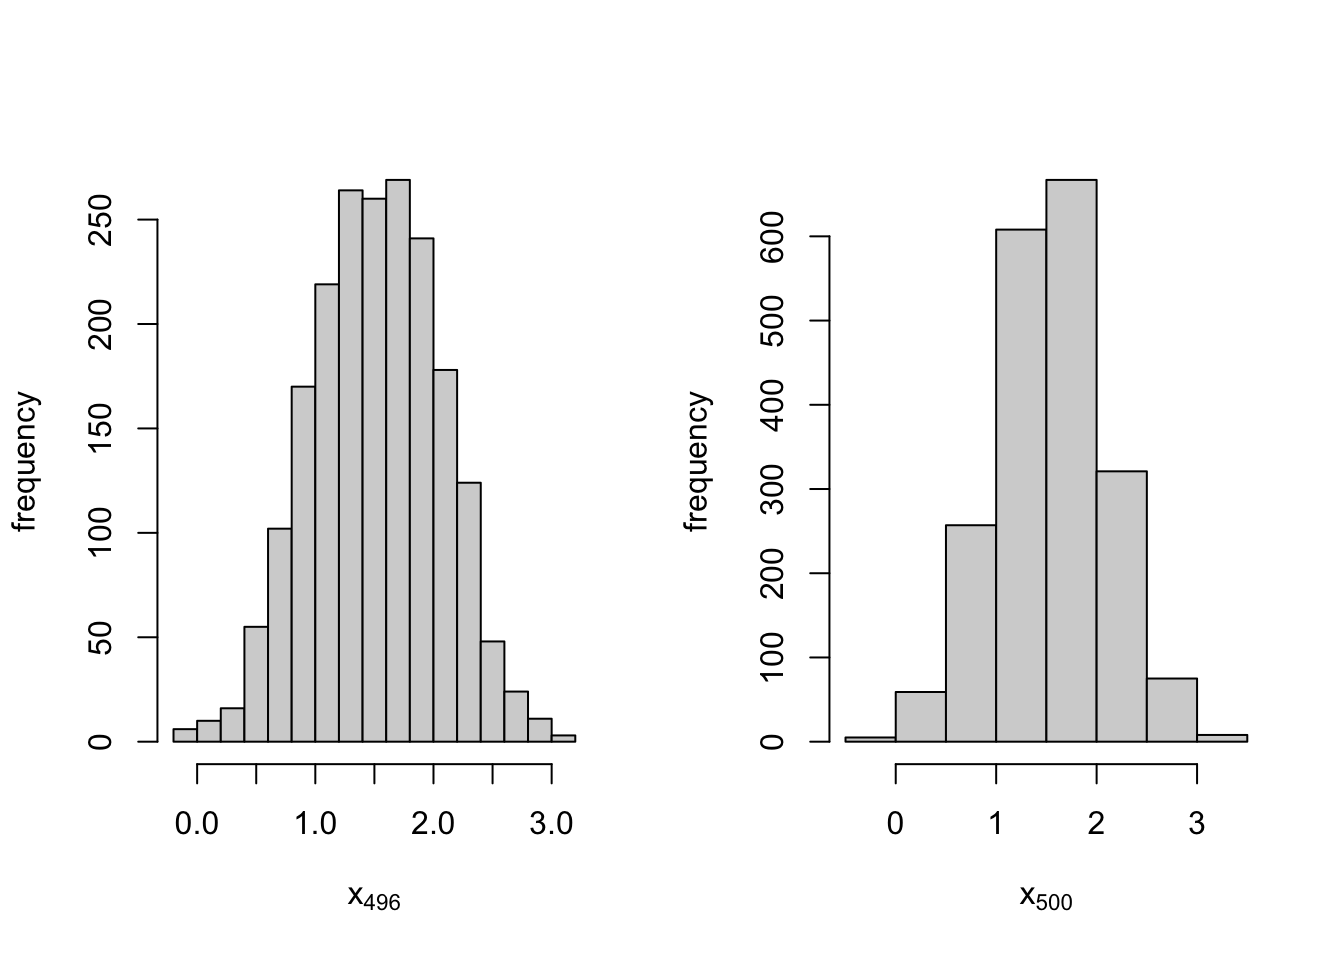 Histograms of posterior predictive samples for holdout time points t = 496 and t = 500 for the AR(1) with level plus noise model.